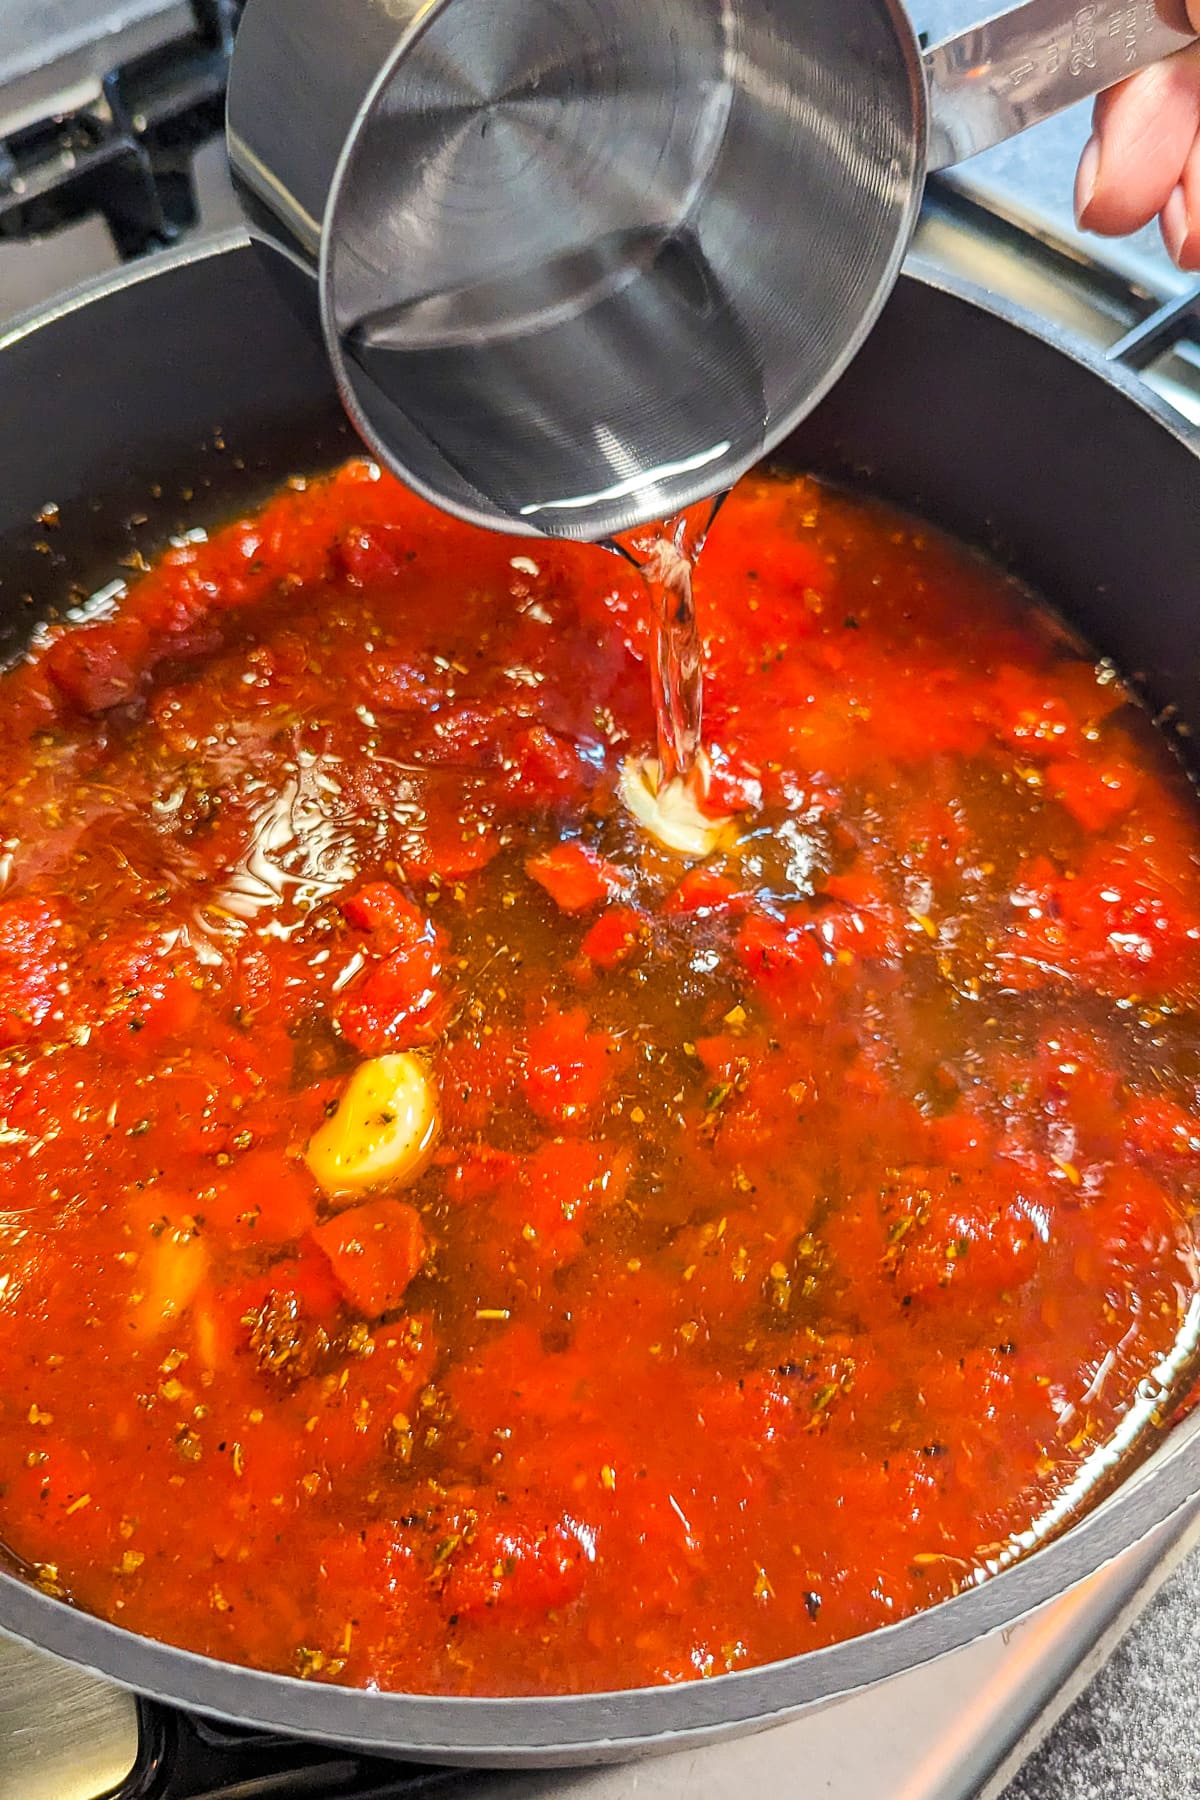 Pouring water in a pan with a tomato sauce.